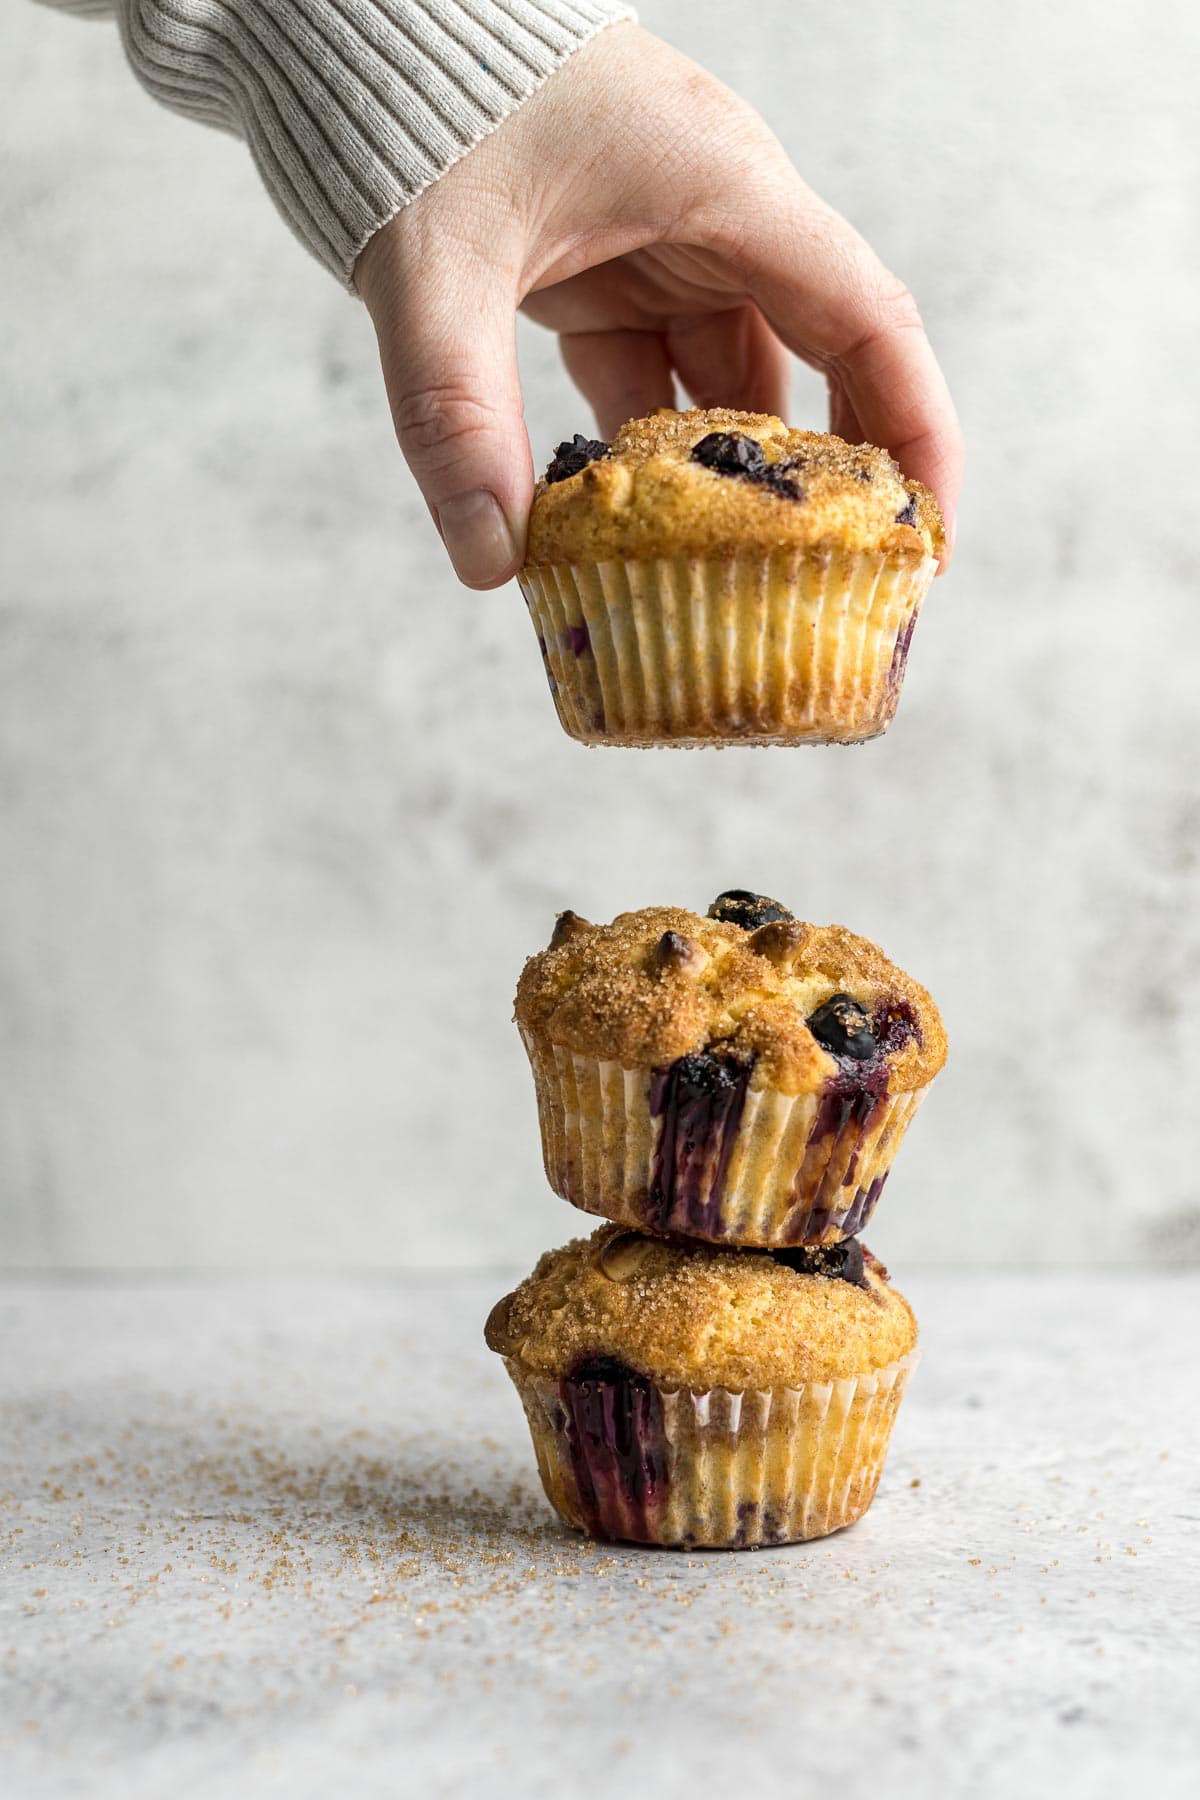 Blueberry muffins stacked on each other with a hand ready to place the third one of top.